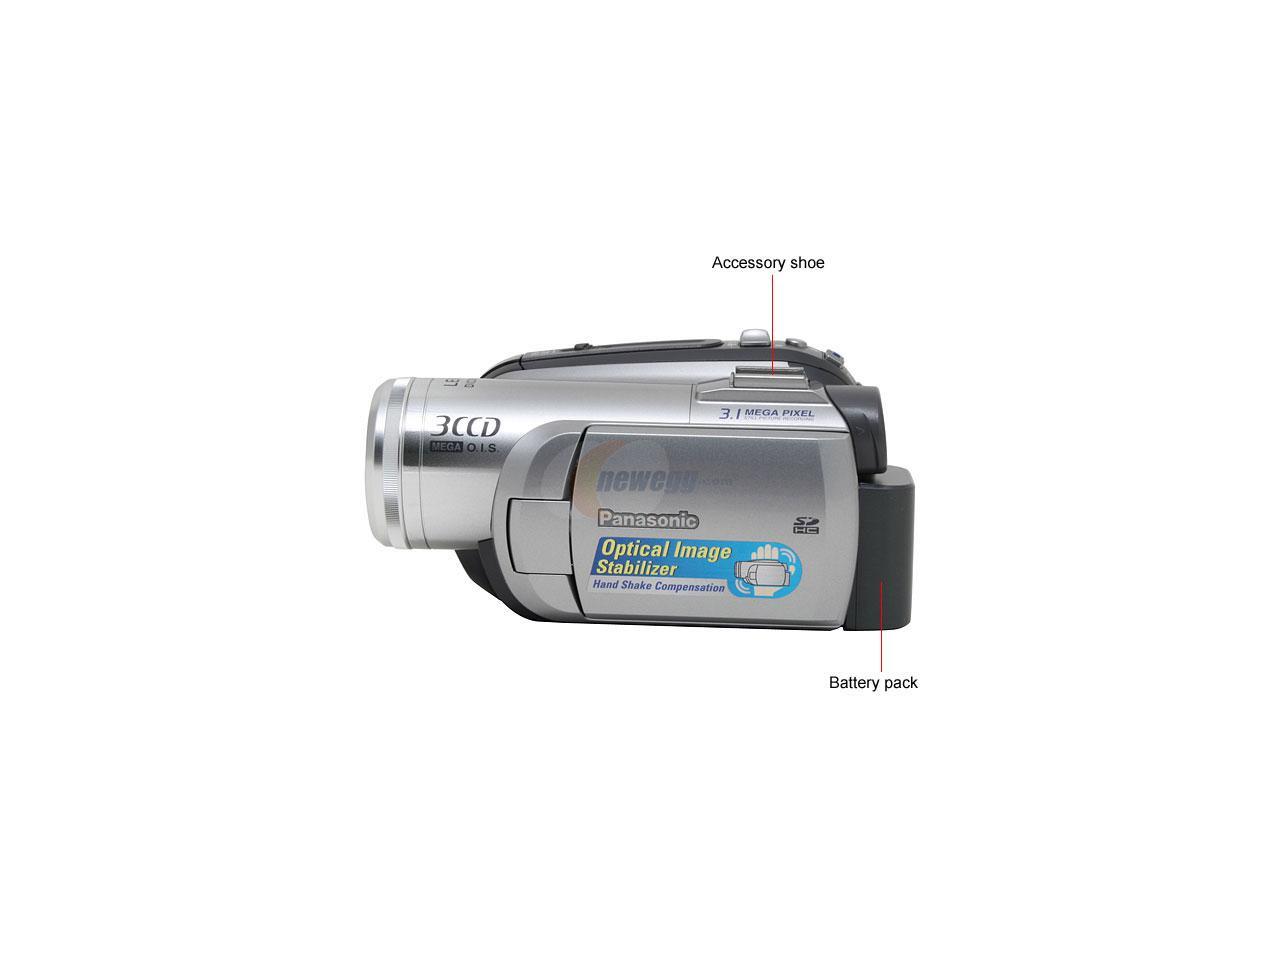 Panasonic PV-GS320 3CCD Silver 10X Variable Speed Digital Optical Zoom